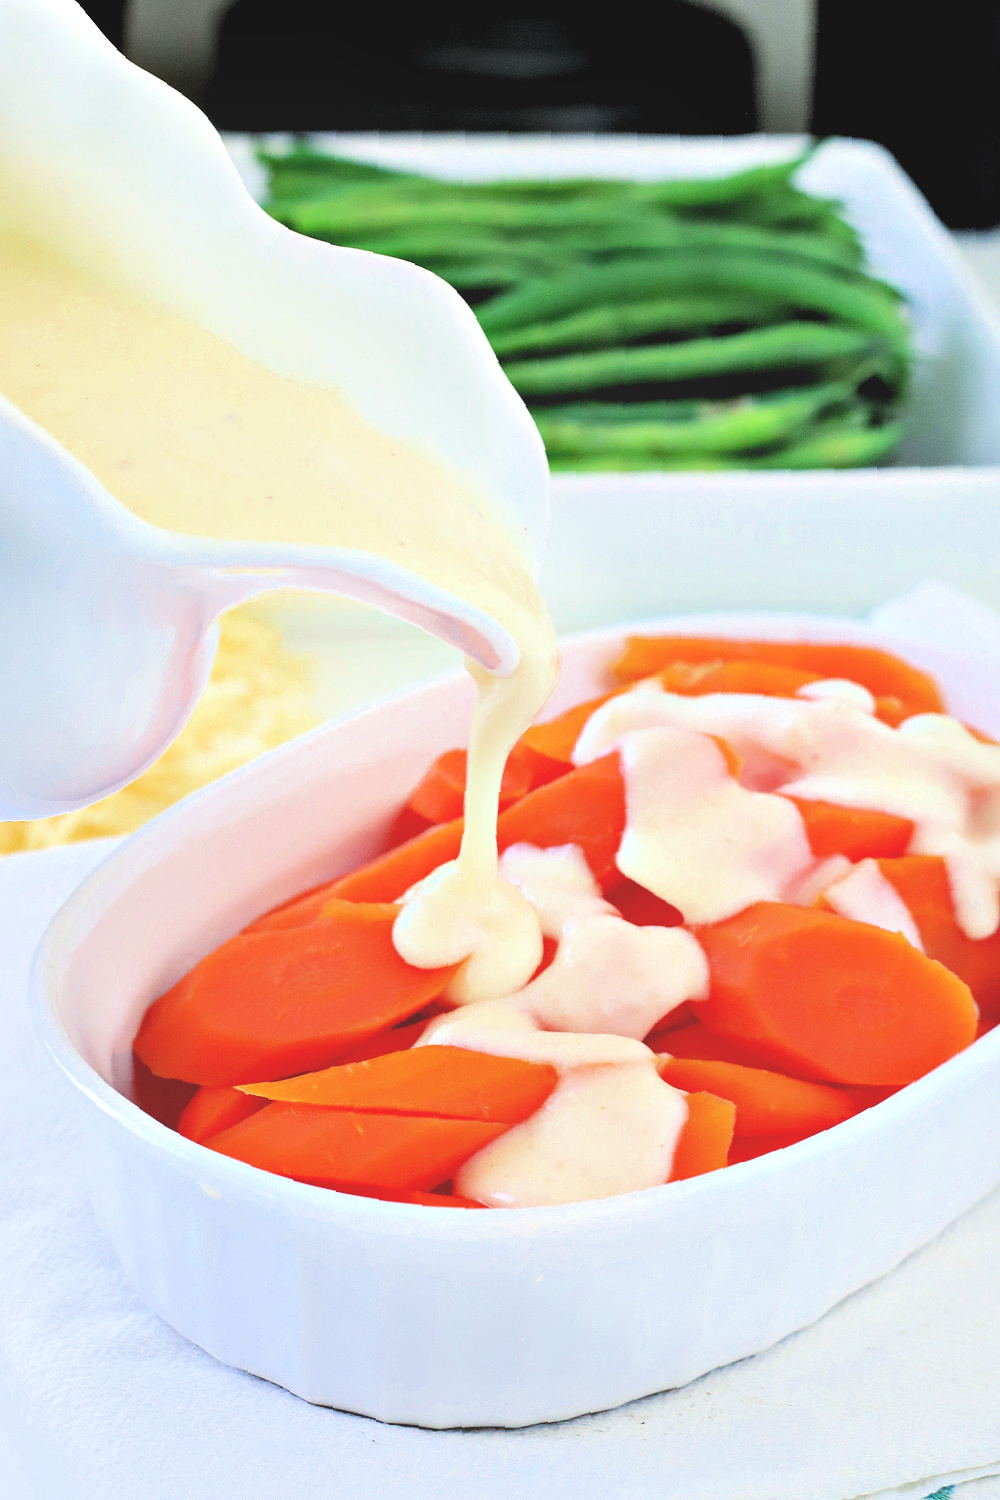 Recipe for creamy cheese sauce for veggies and cooked carrots